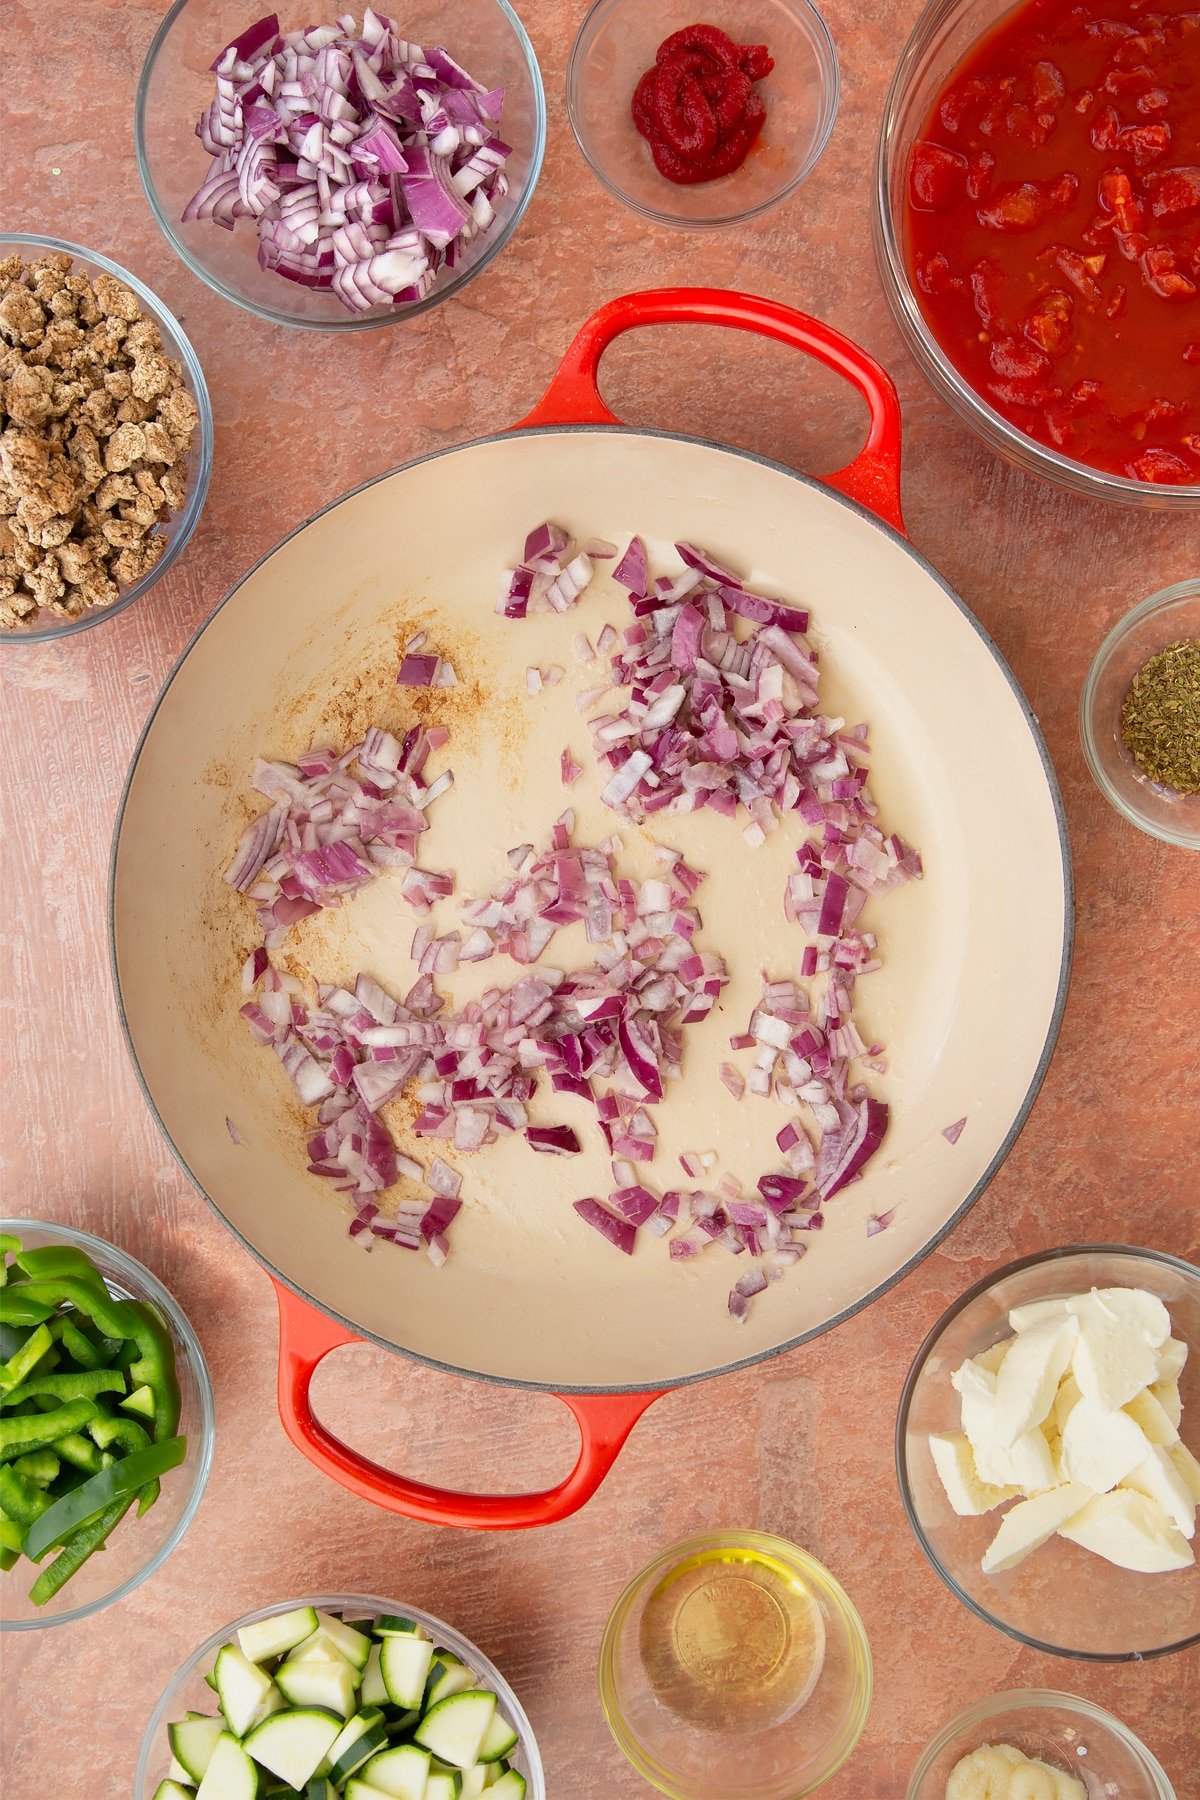 A casserole dish containing fried red onion and garlic. Ingredients to make bolognese al forno surround the dish.